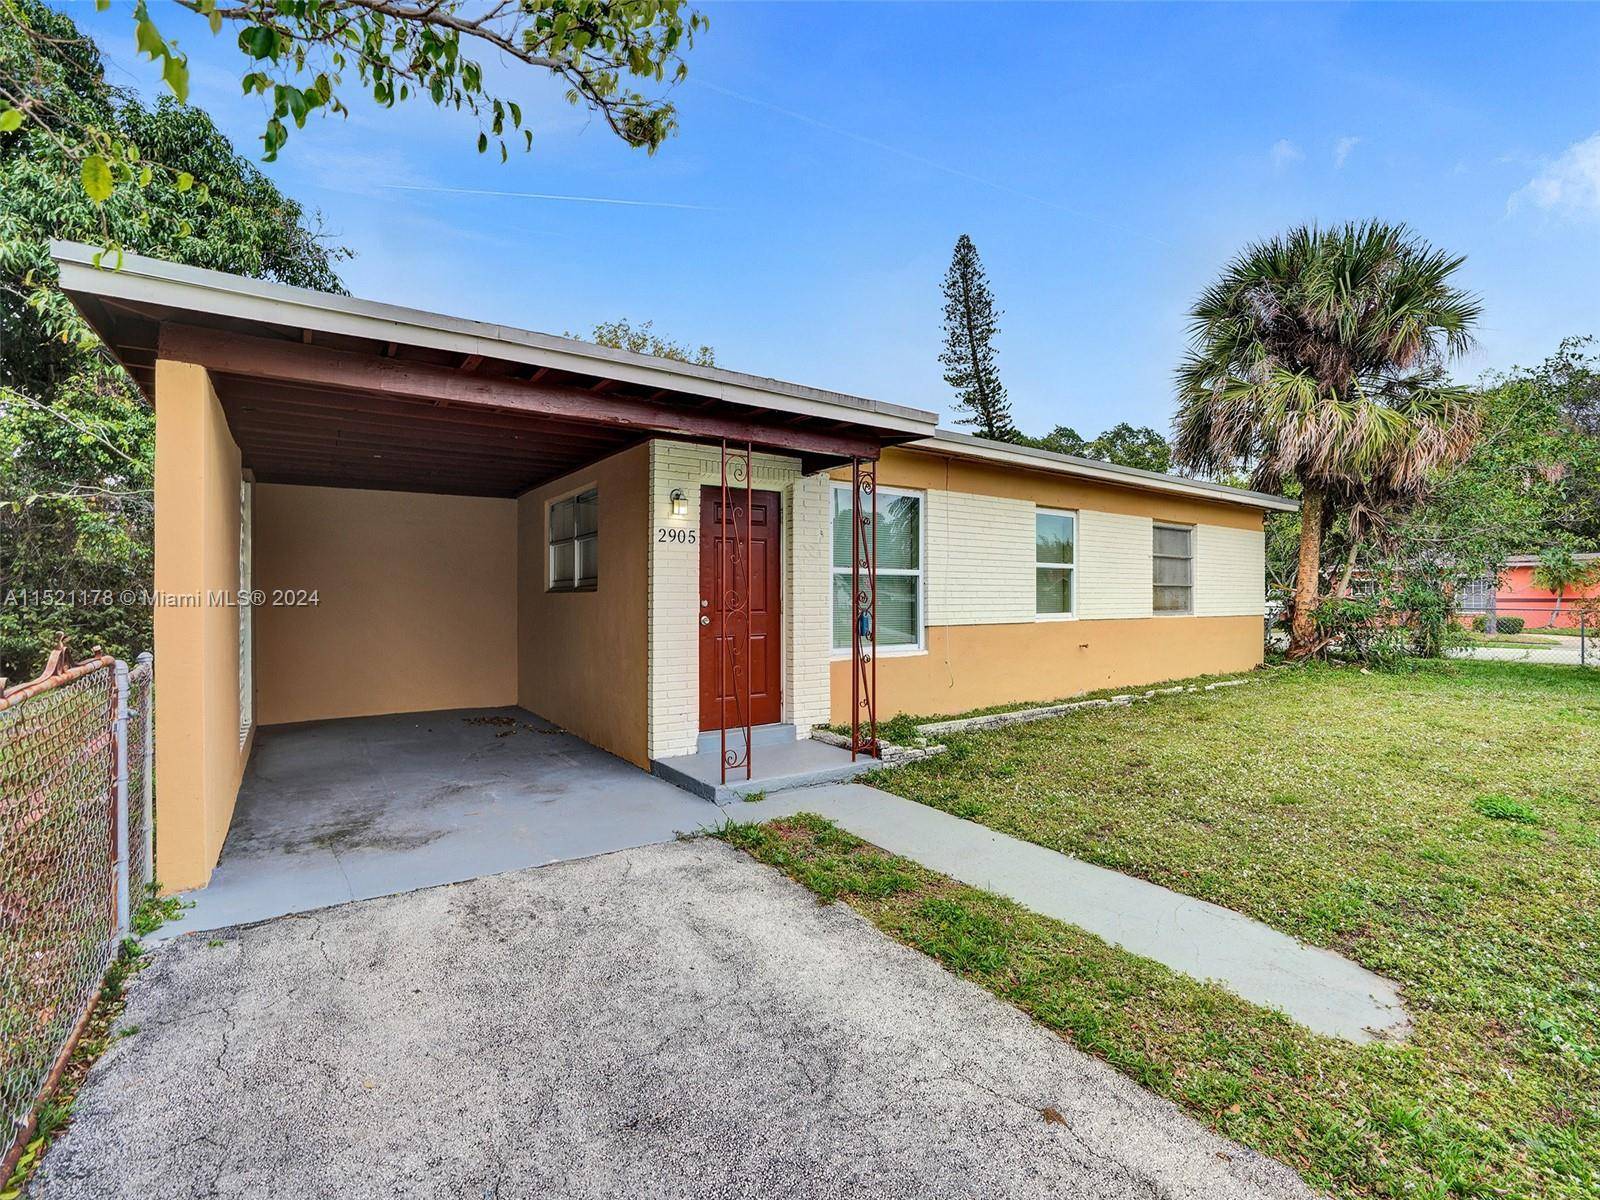 Nice single family home, 3 bedrooms and 1 bathroom centrally located in Fort Lauderdale.